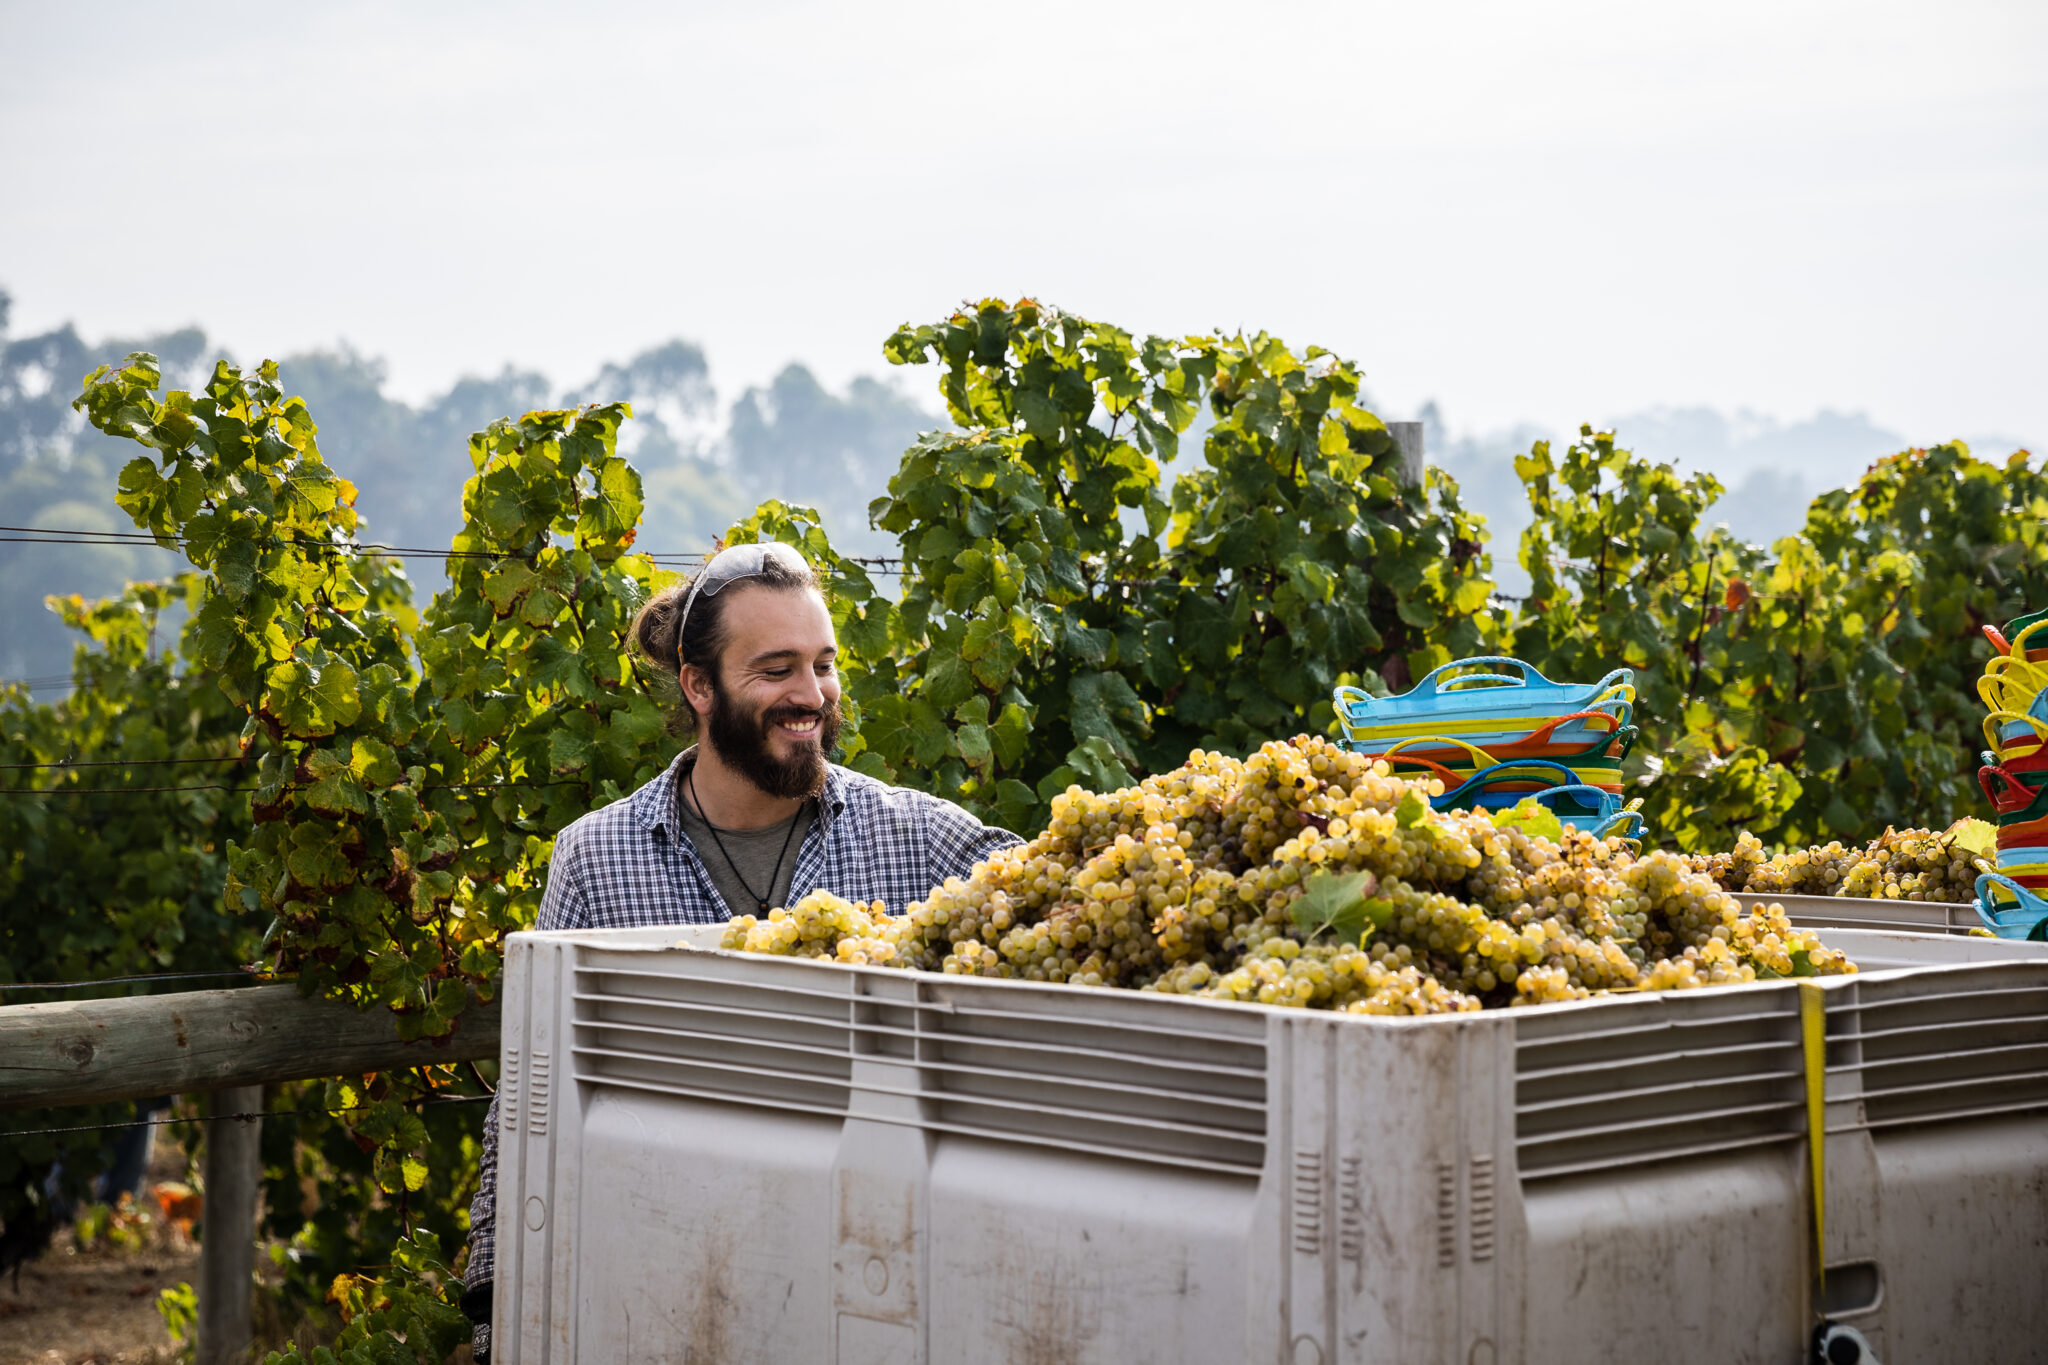 A worker smiling while looking at a large tub full of grapes after being picked in a vineyard